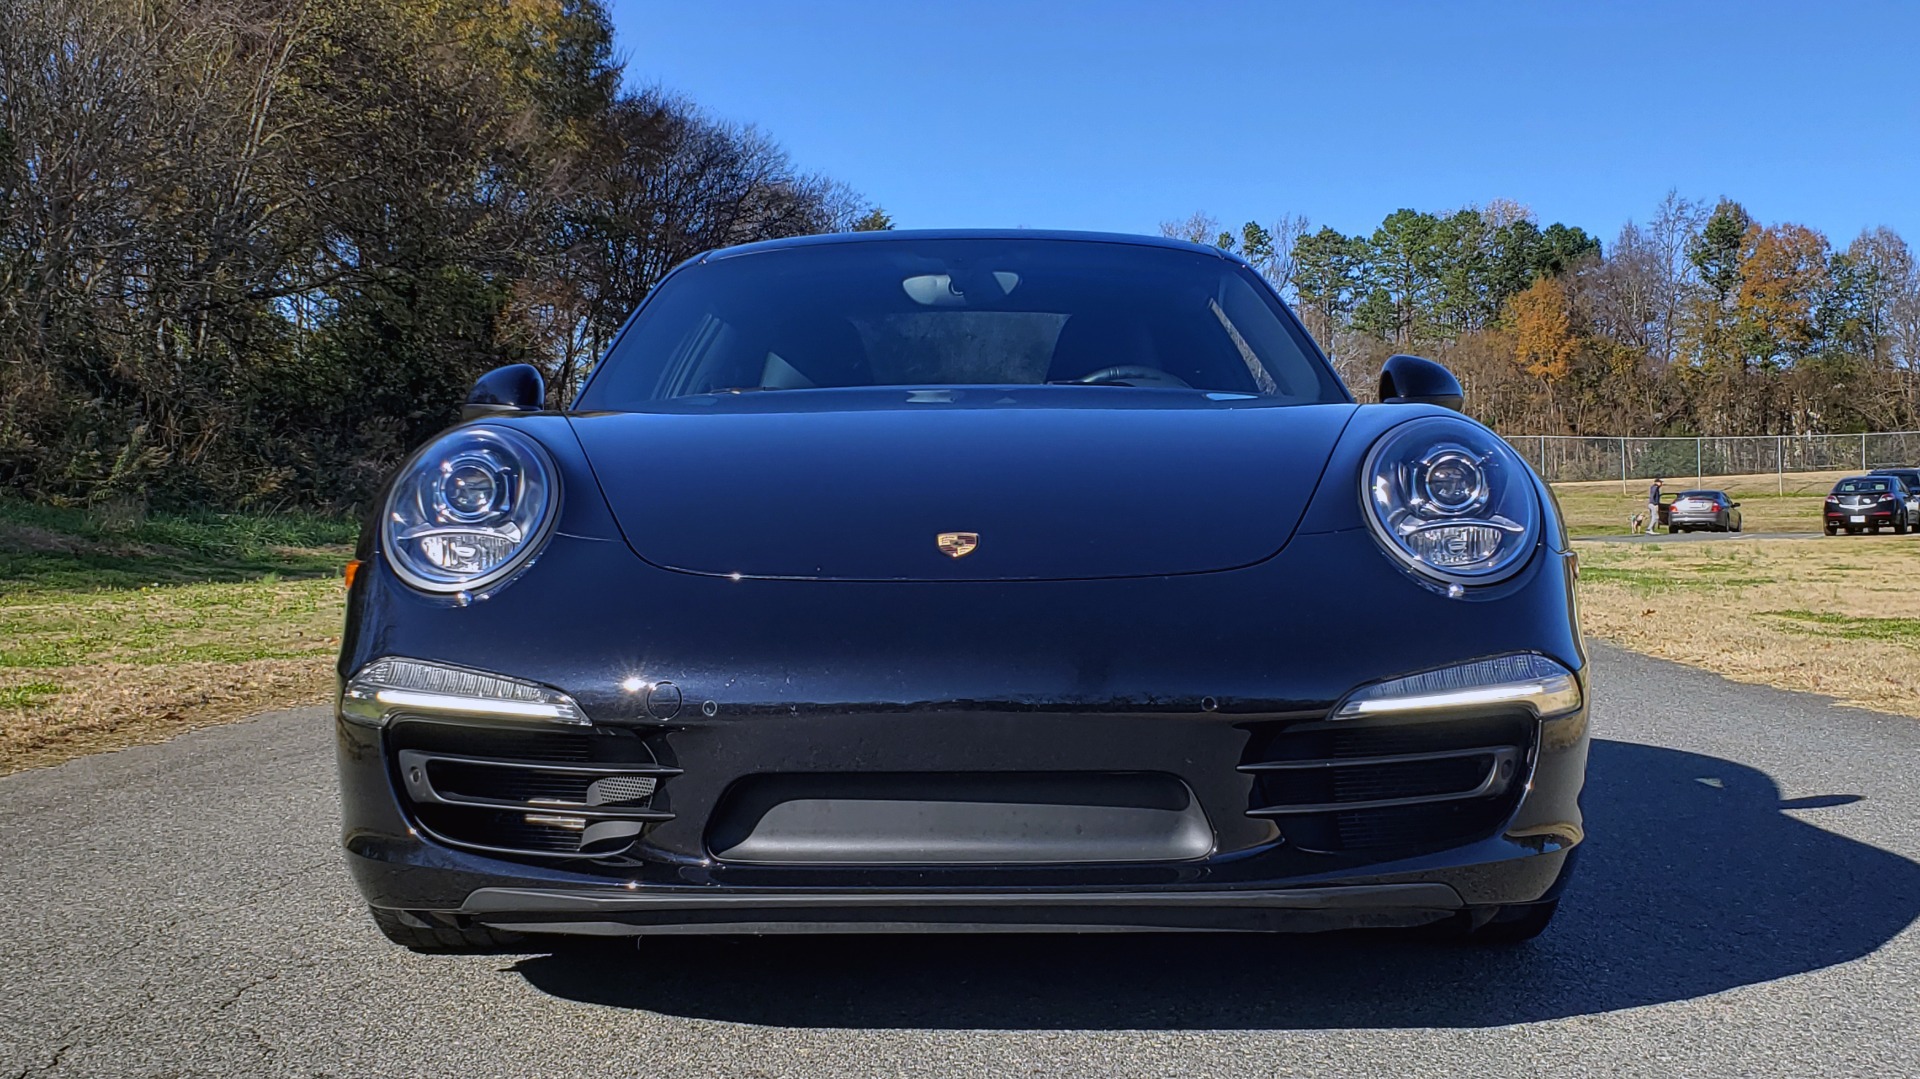 Used 2016 Porsche 911 CARRERA 4S PREM / NAV / CHRONO / BOSE / PDLS / SPORT EXH for sale Sold at Formula Imports in Charlotte NC 28227 22